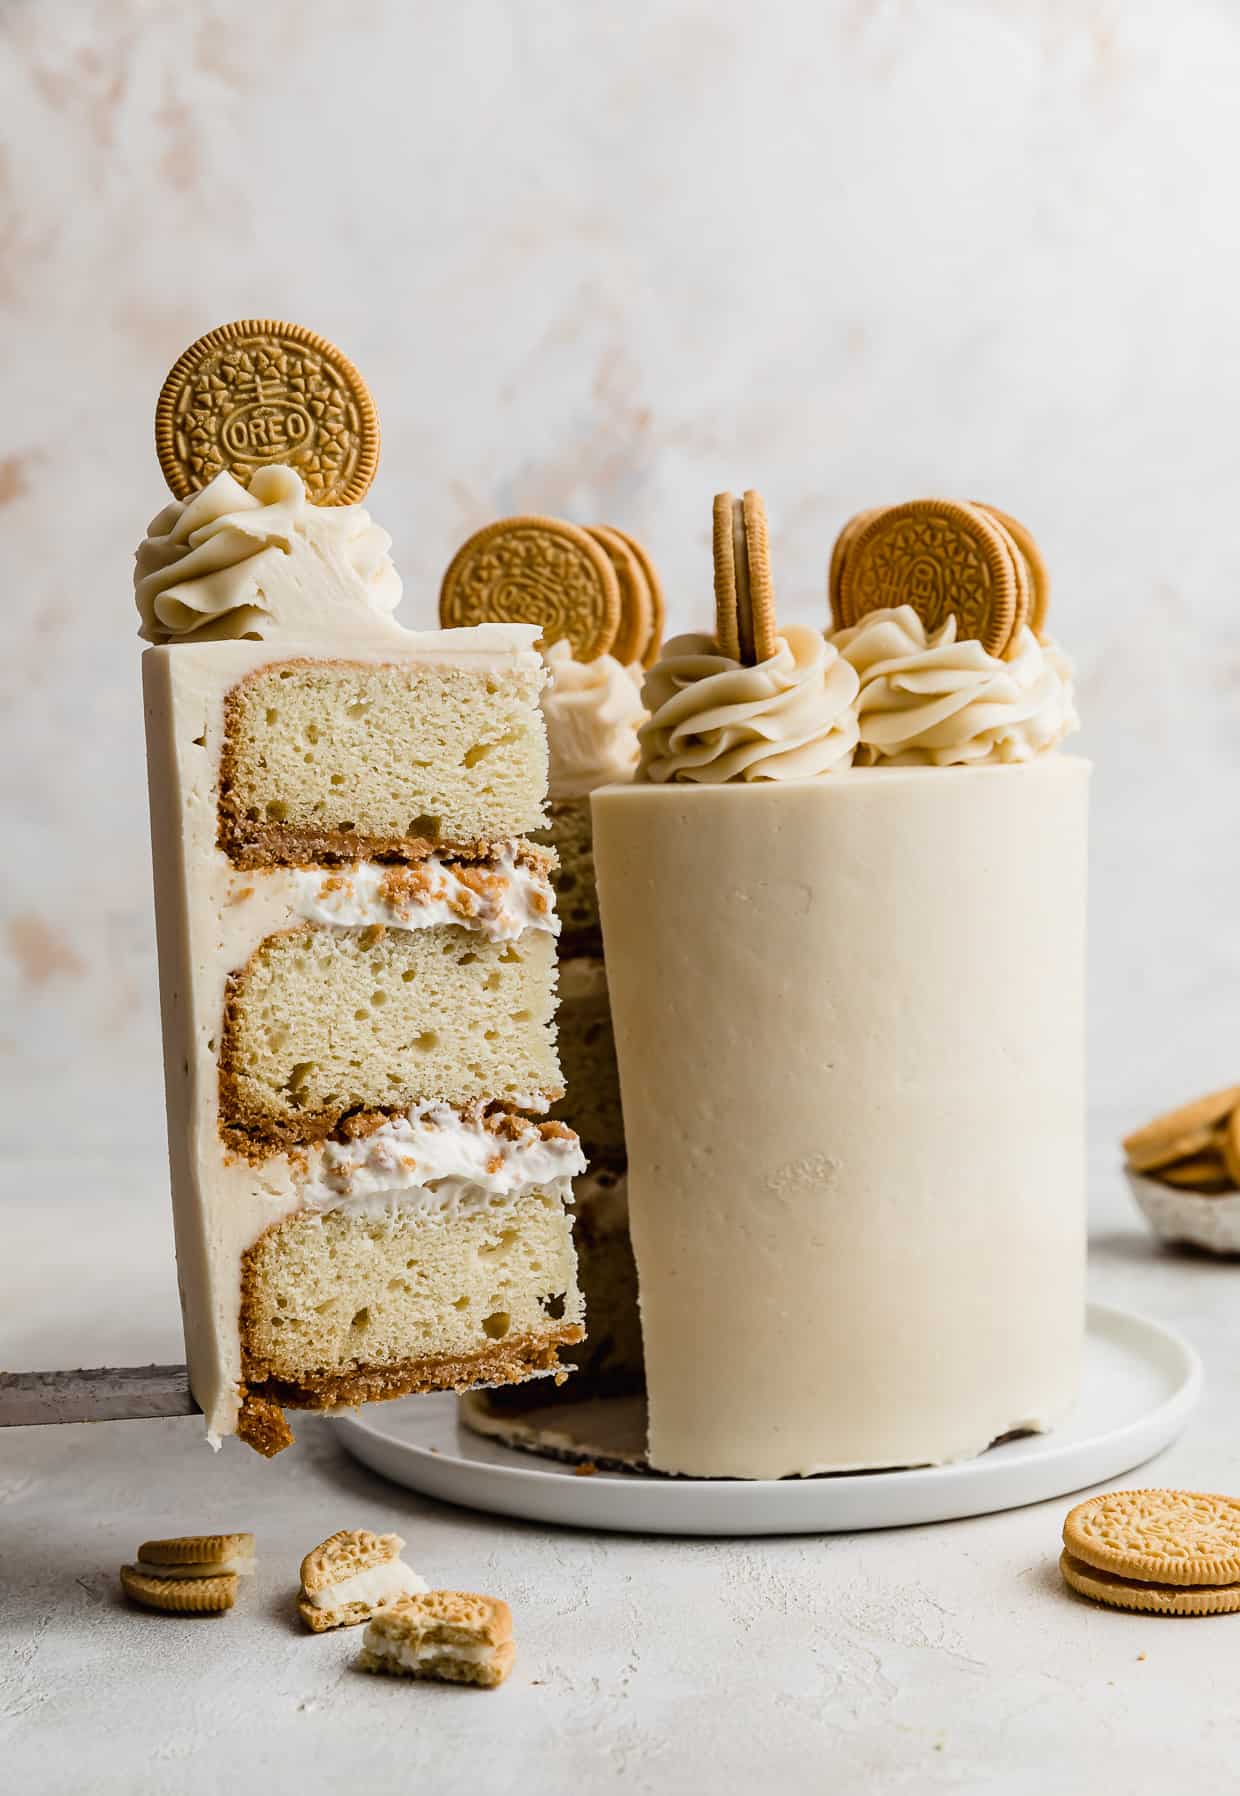 A slice of Golden Oreo Cake balancing on a knife infant of a decorated Golden Oreo Cake.